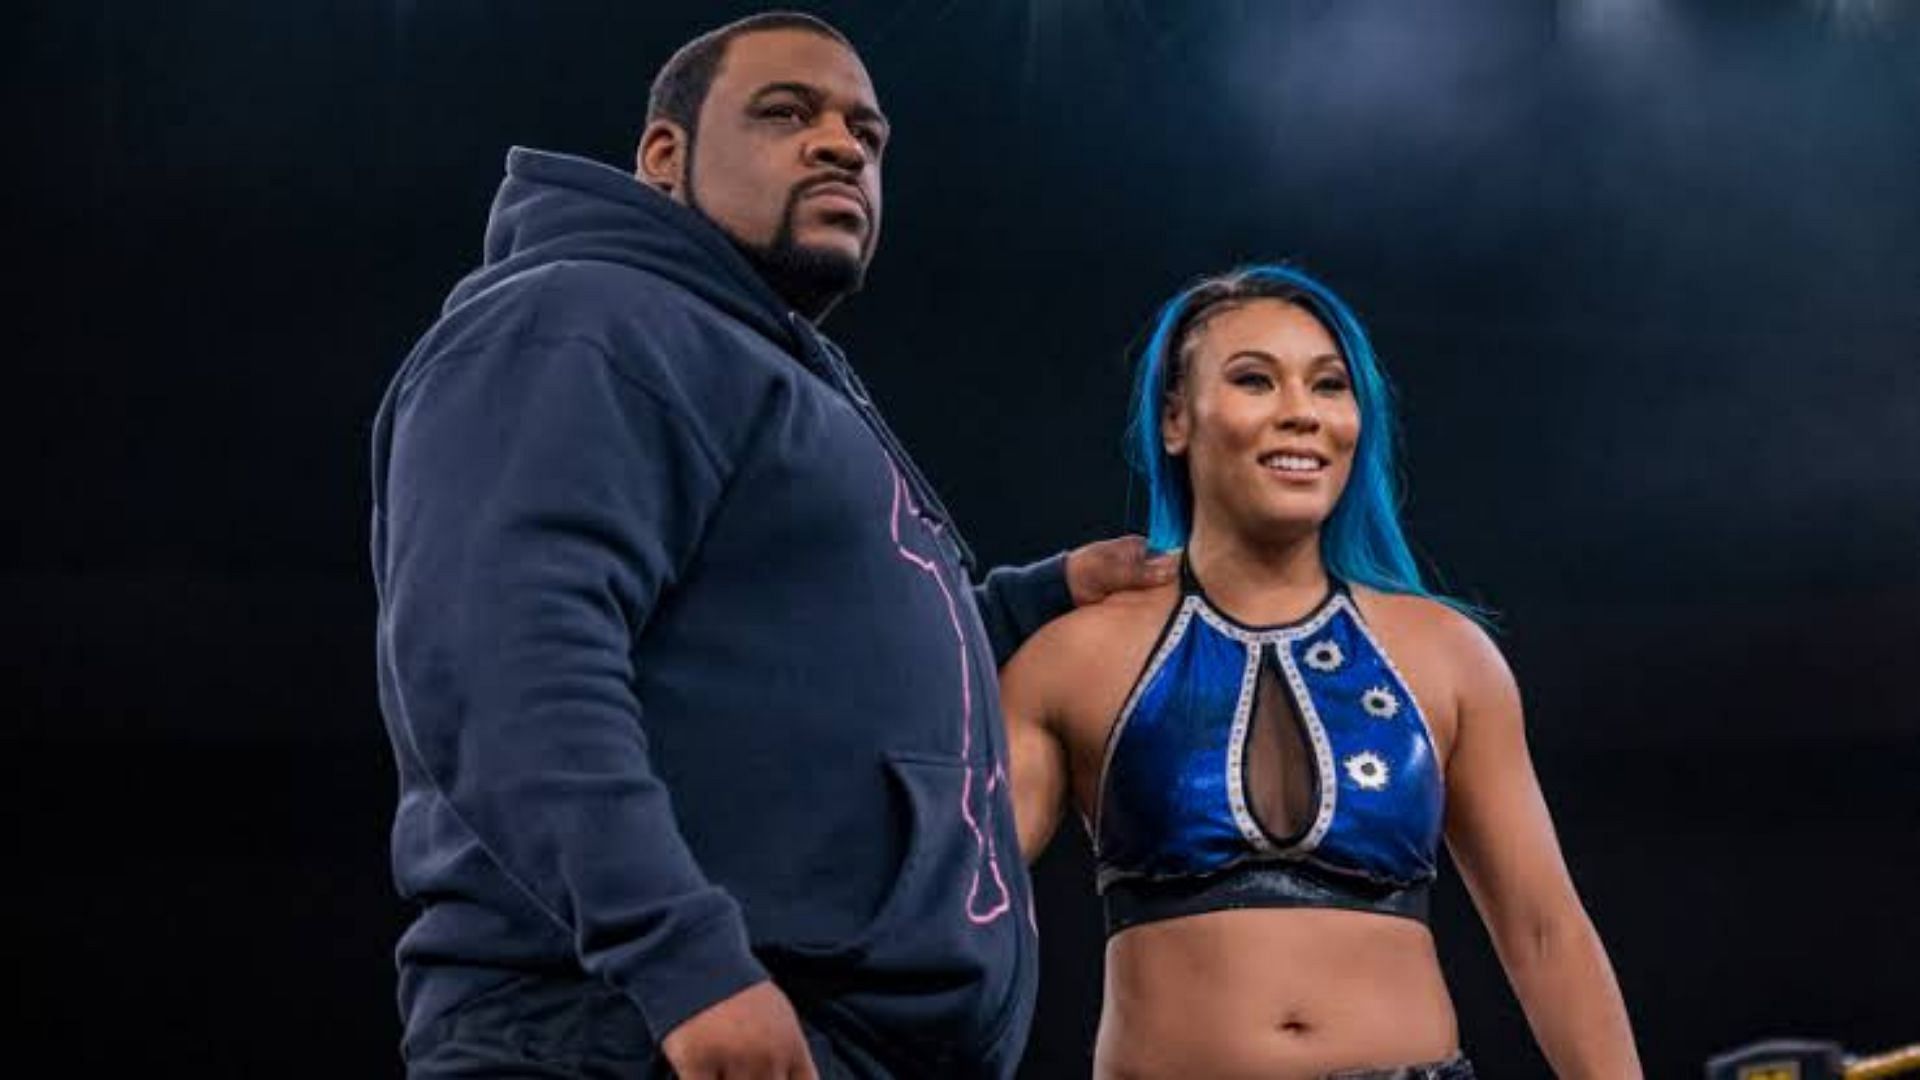 Keith Lee and Mia Yim were let go by WWE in November 2021